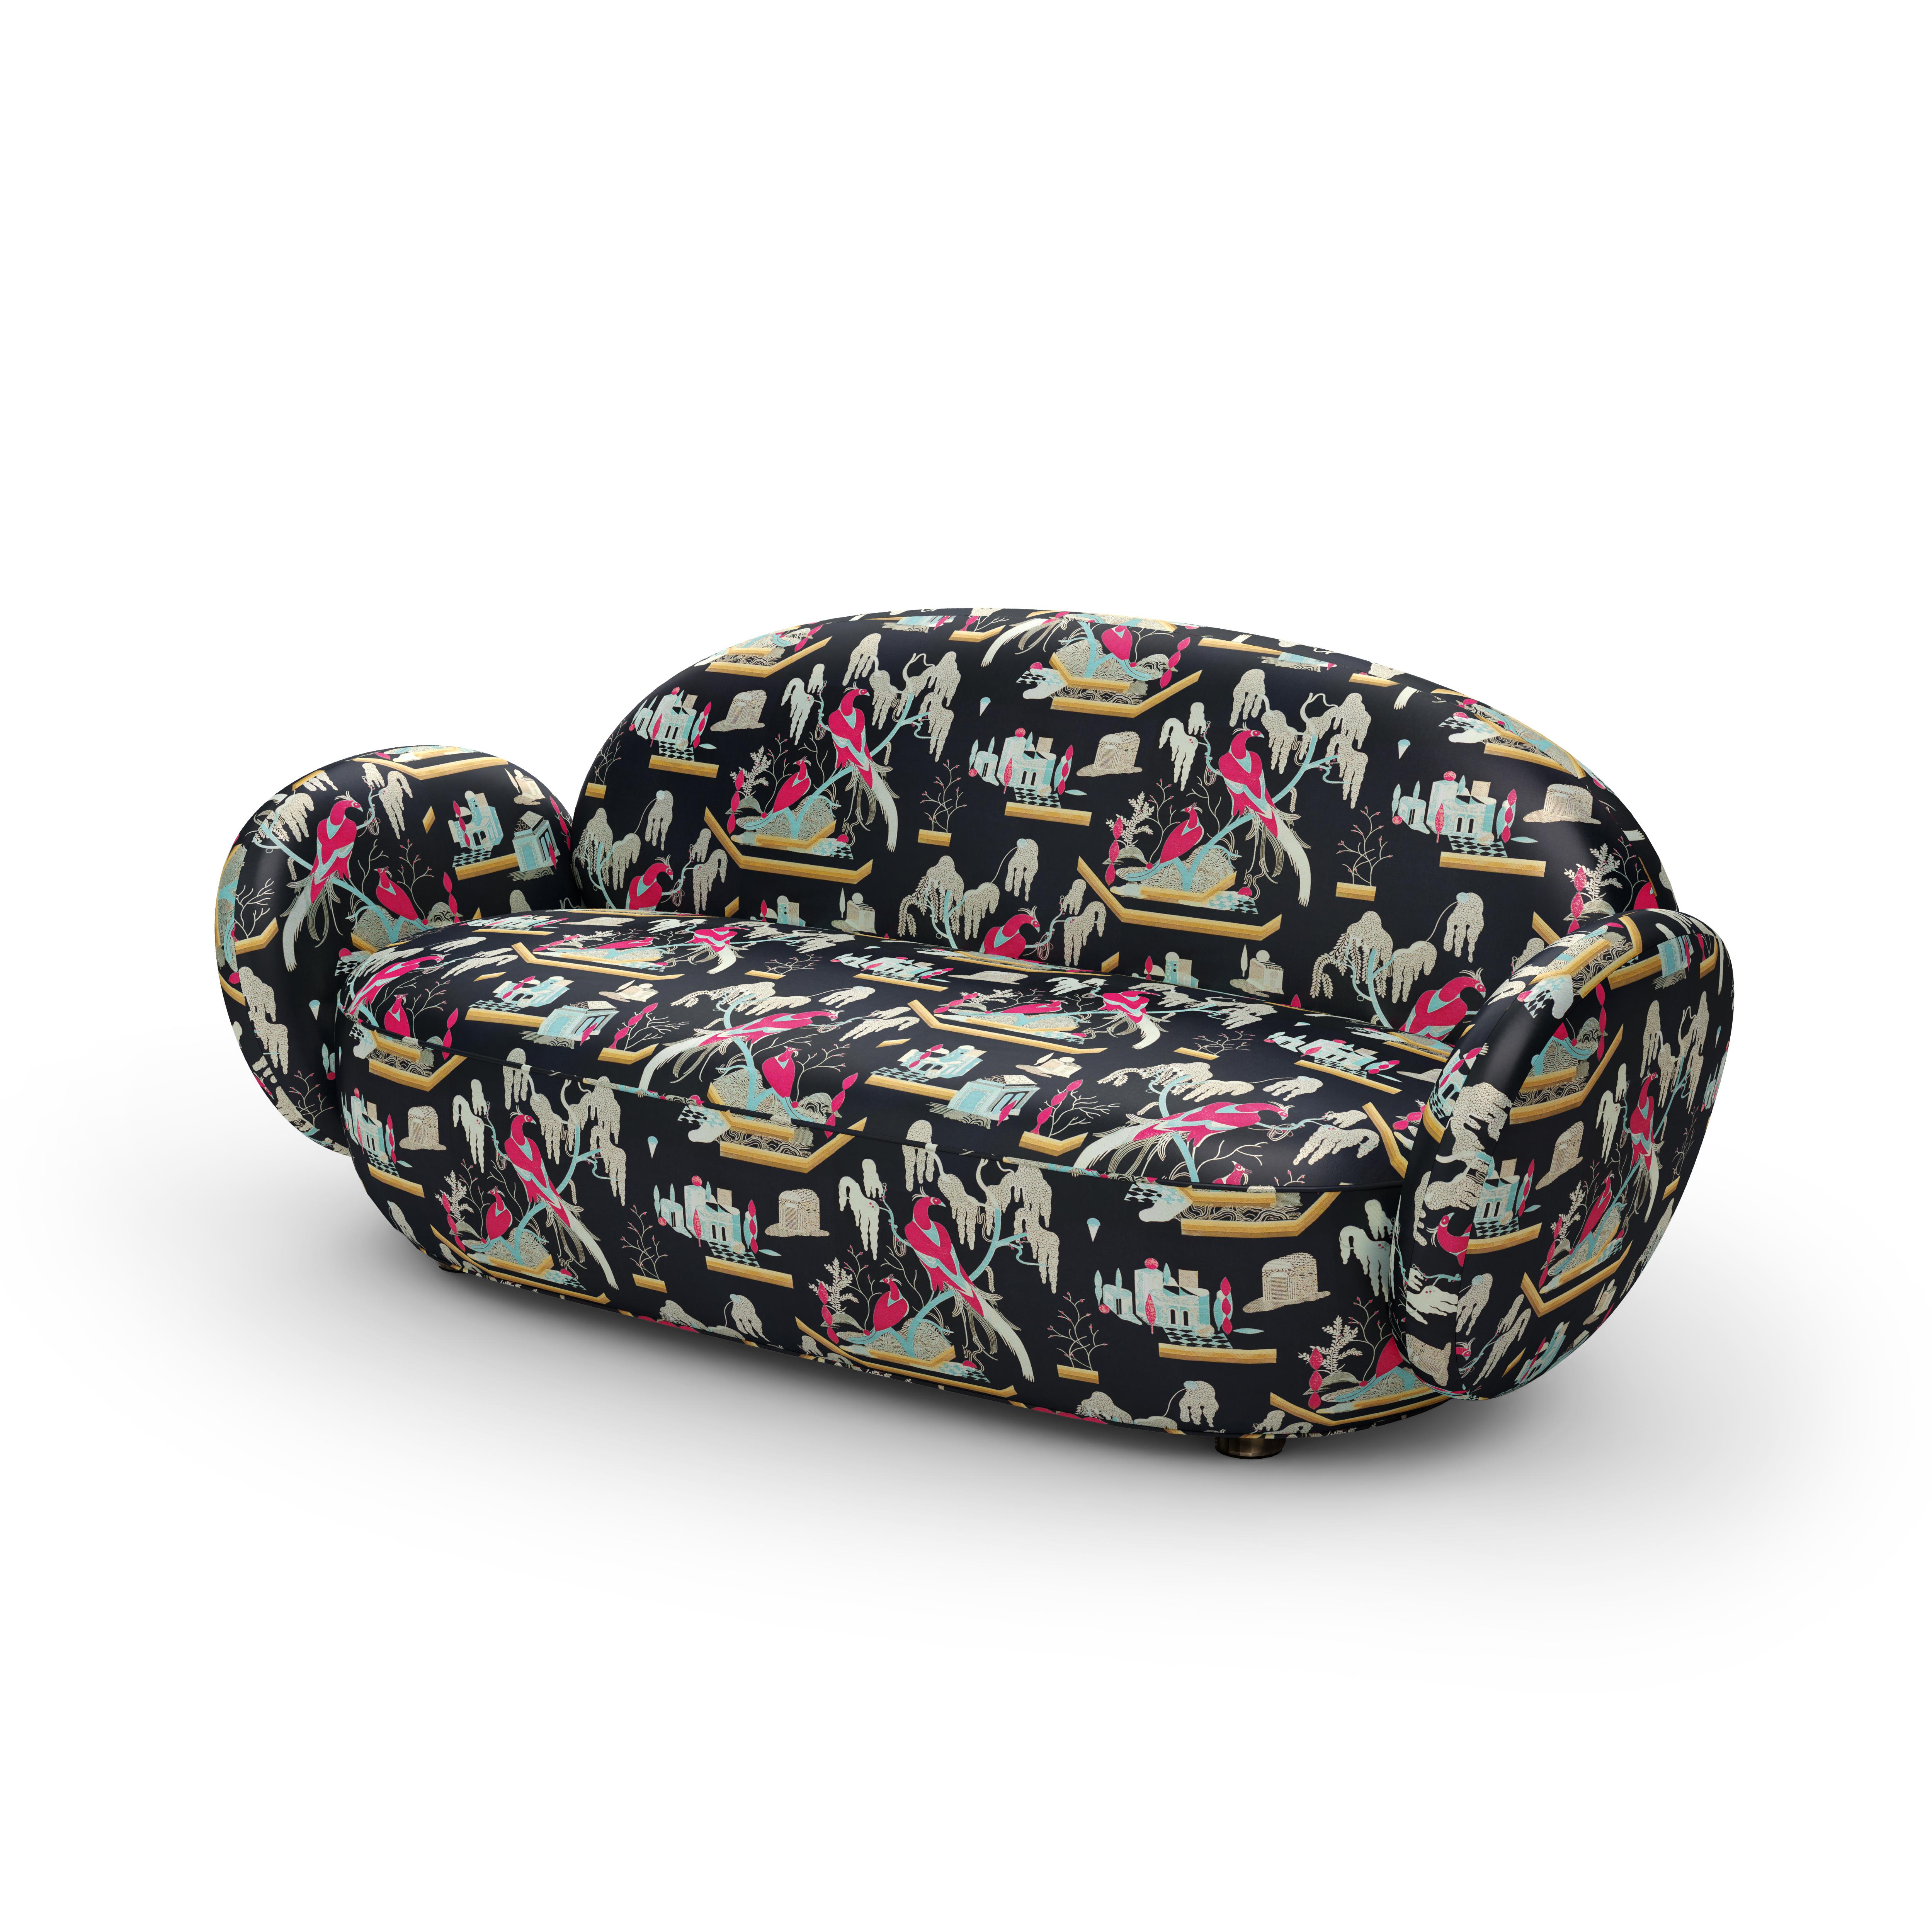 Dolce sofa is an exquisite and ergonomically perfect three seater sofa upholstered in the plush black-pink jacquard fabric, This Must Be The Place by Dedar Milano. Ideal for playful lazing! Designed by Matteo Cibic

Have you heard of